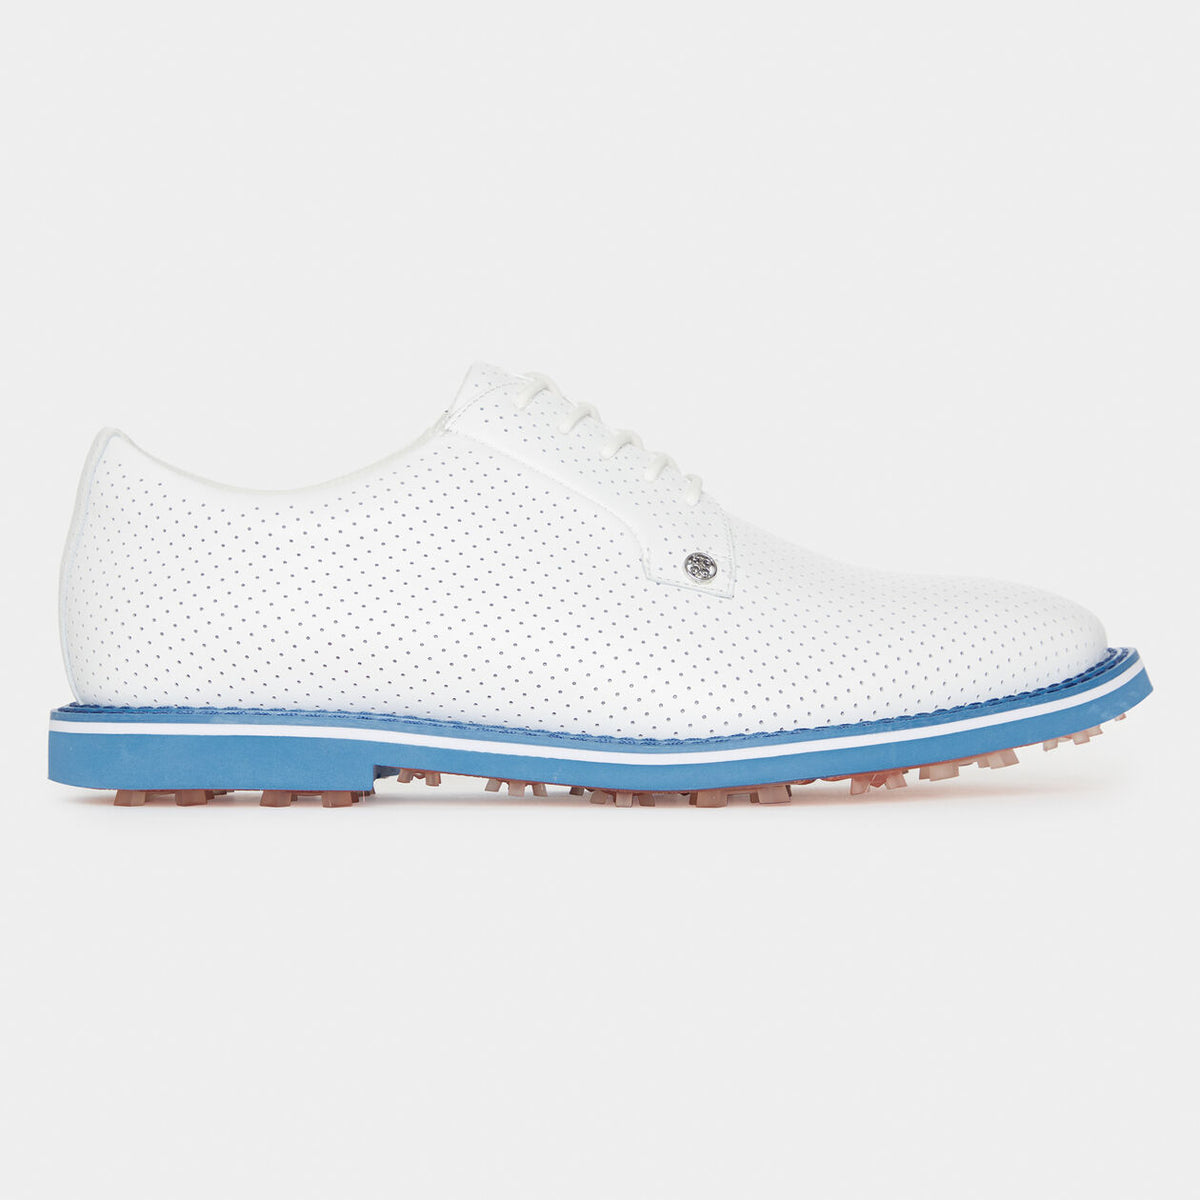 g fore golf shoes 10.5 mens